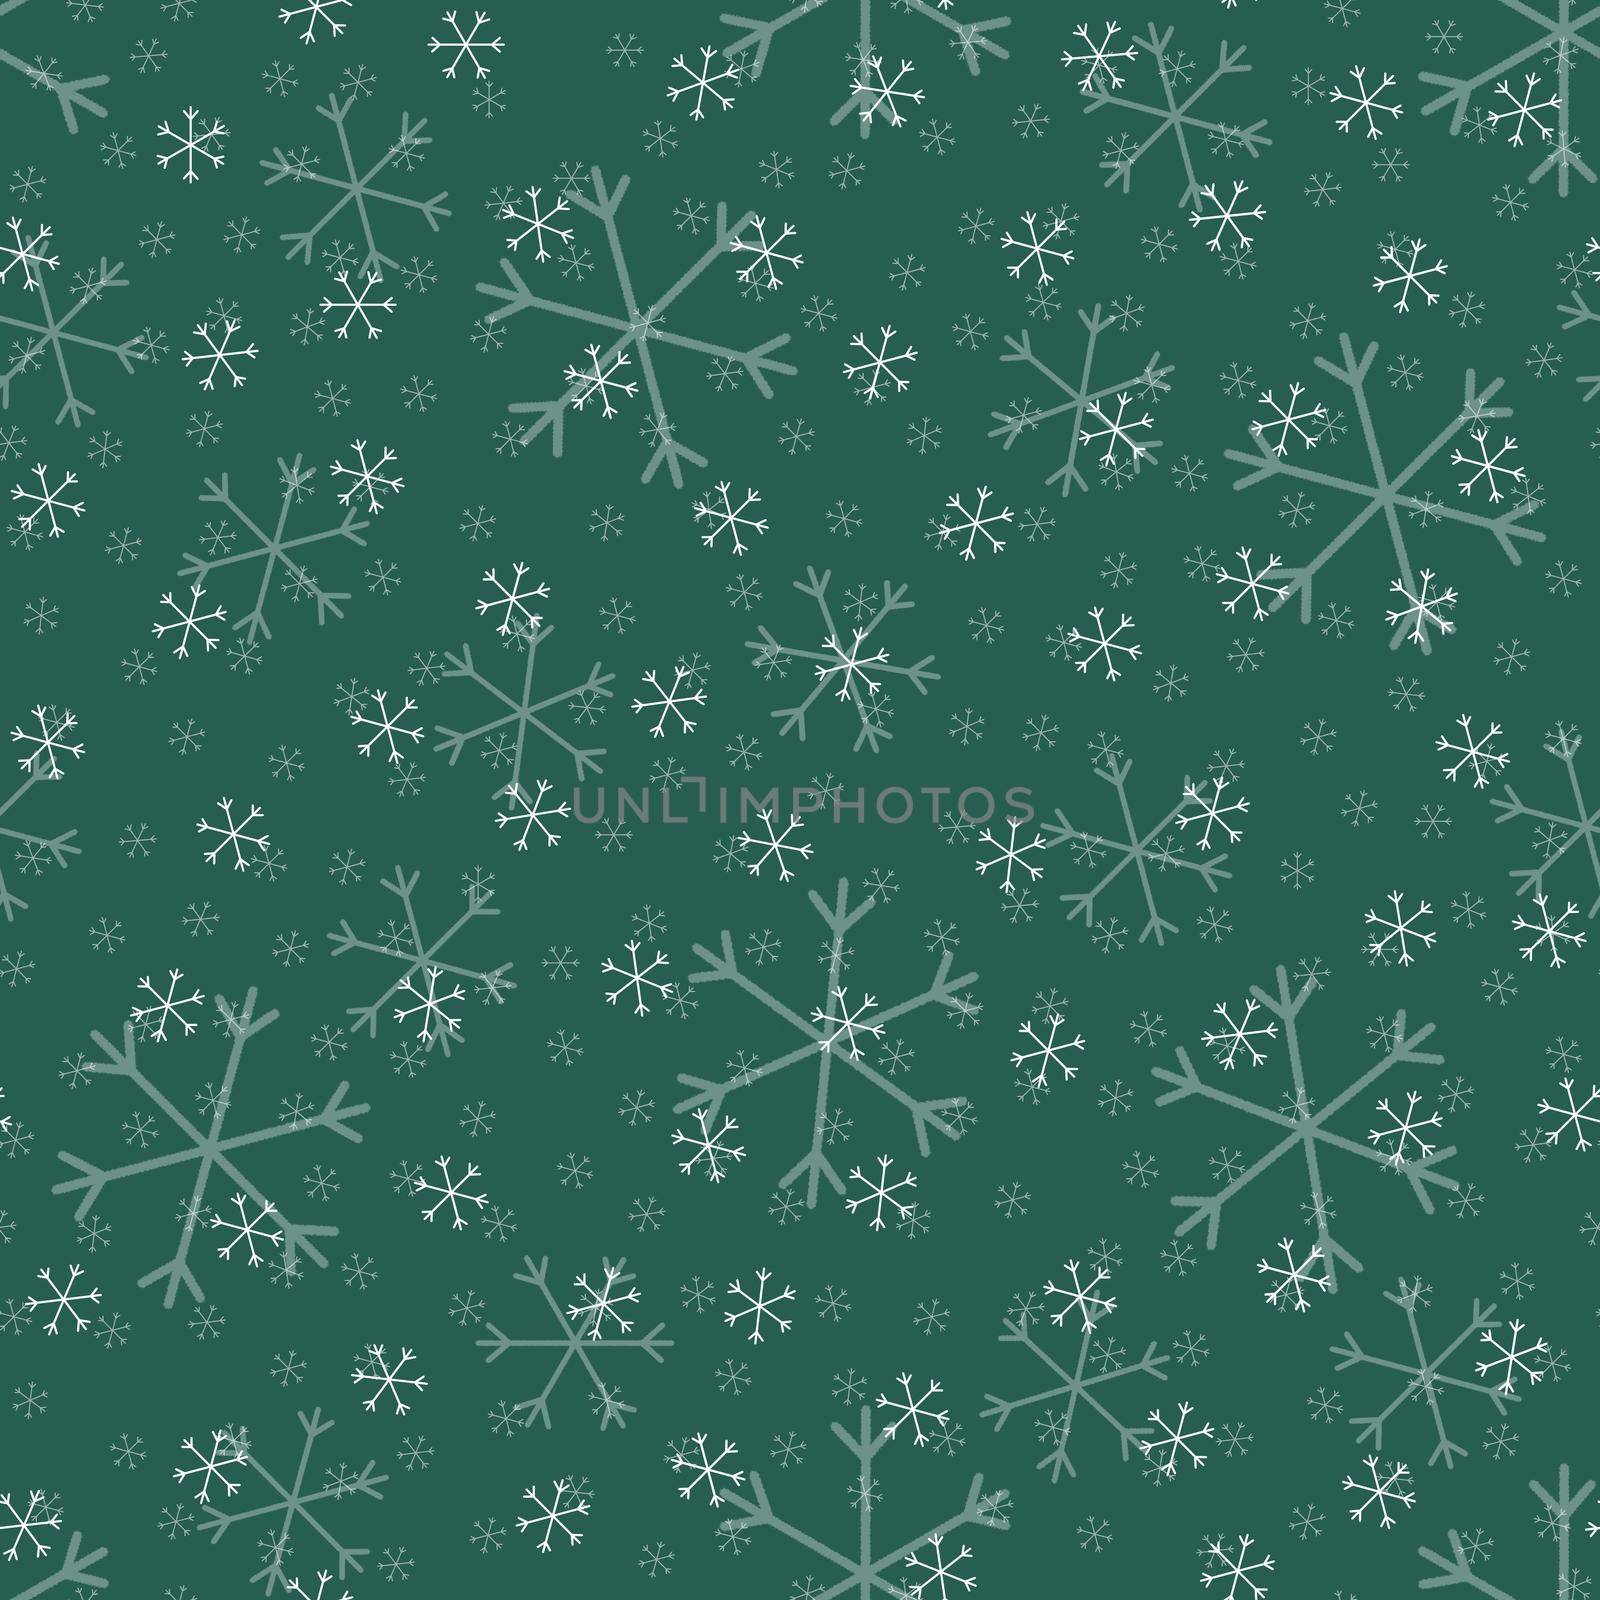 Seamless Christmas pattern doodle with hand random drawn snowflakes.Wrapping paper for presents, funny textile fabric print, design,decor, food wrap, backgrounds. new year.Raster copy.Green, white by Angelsmoon